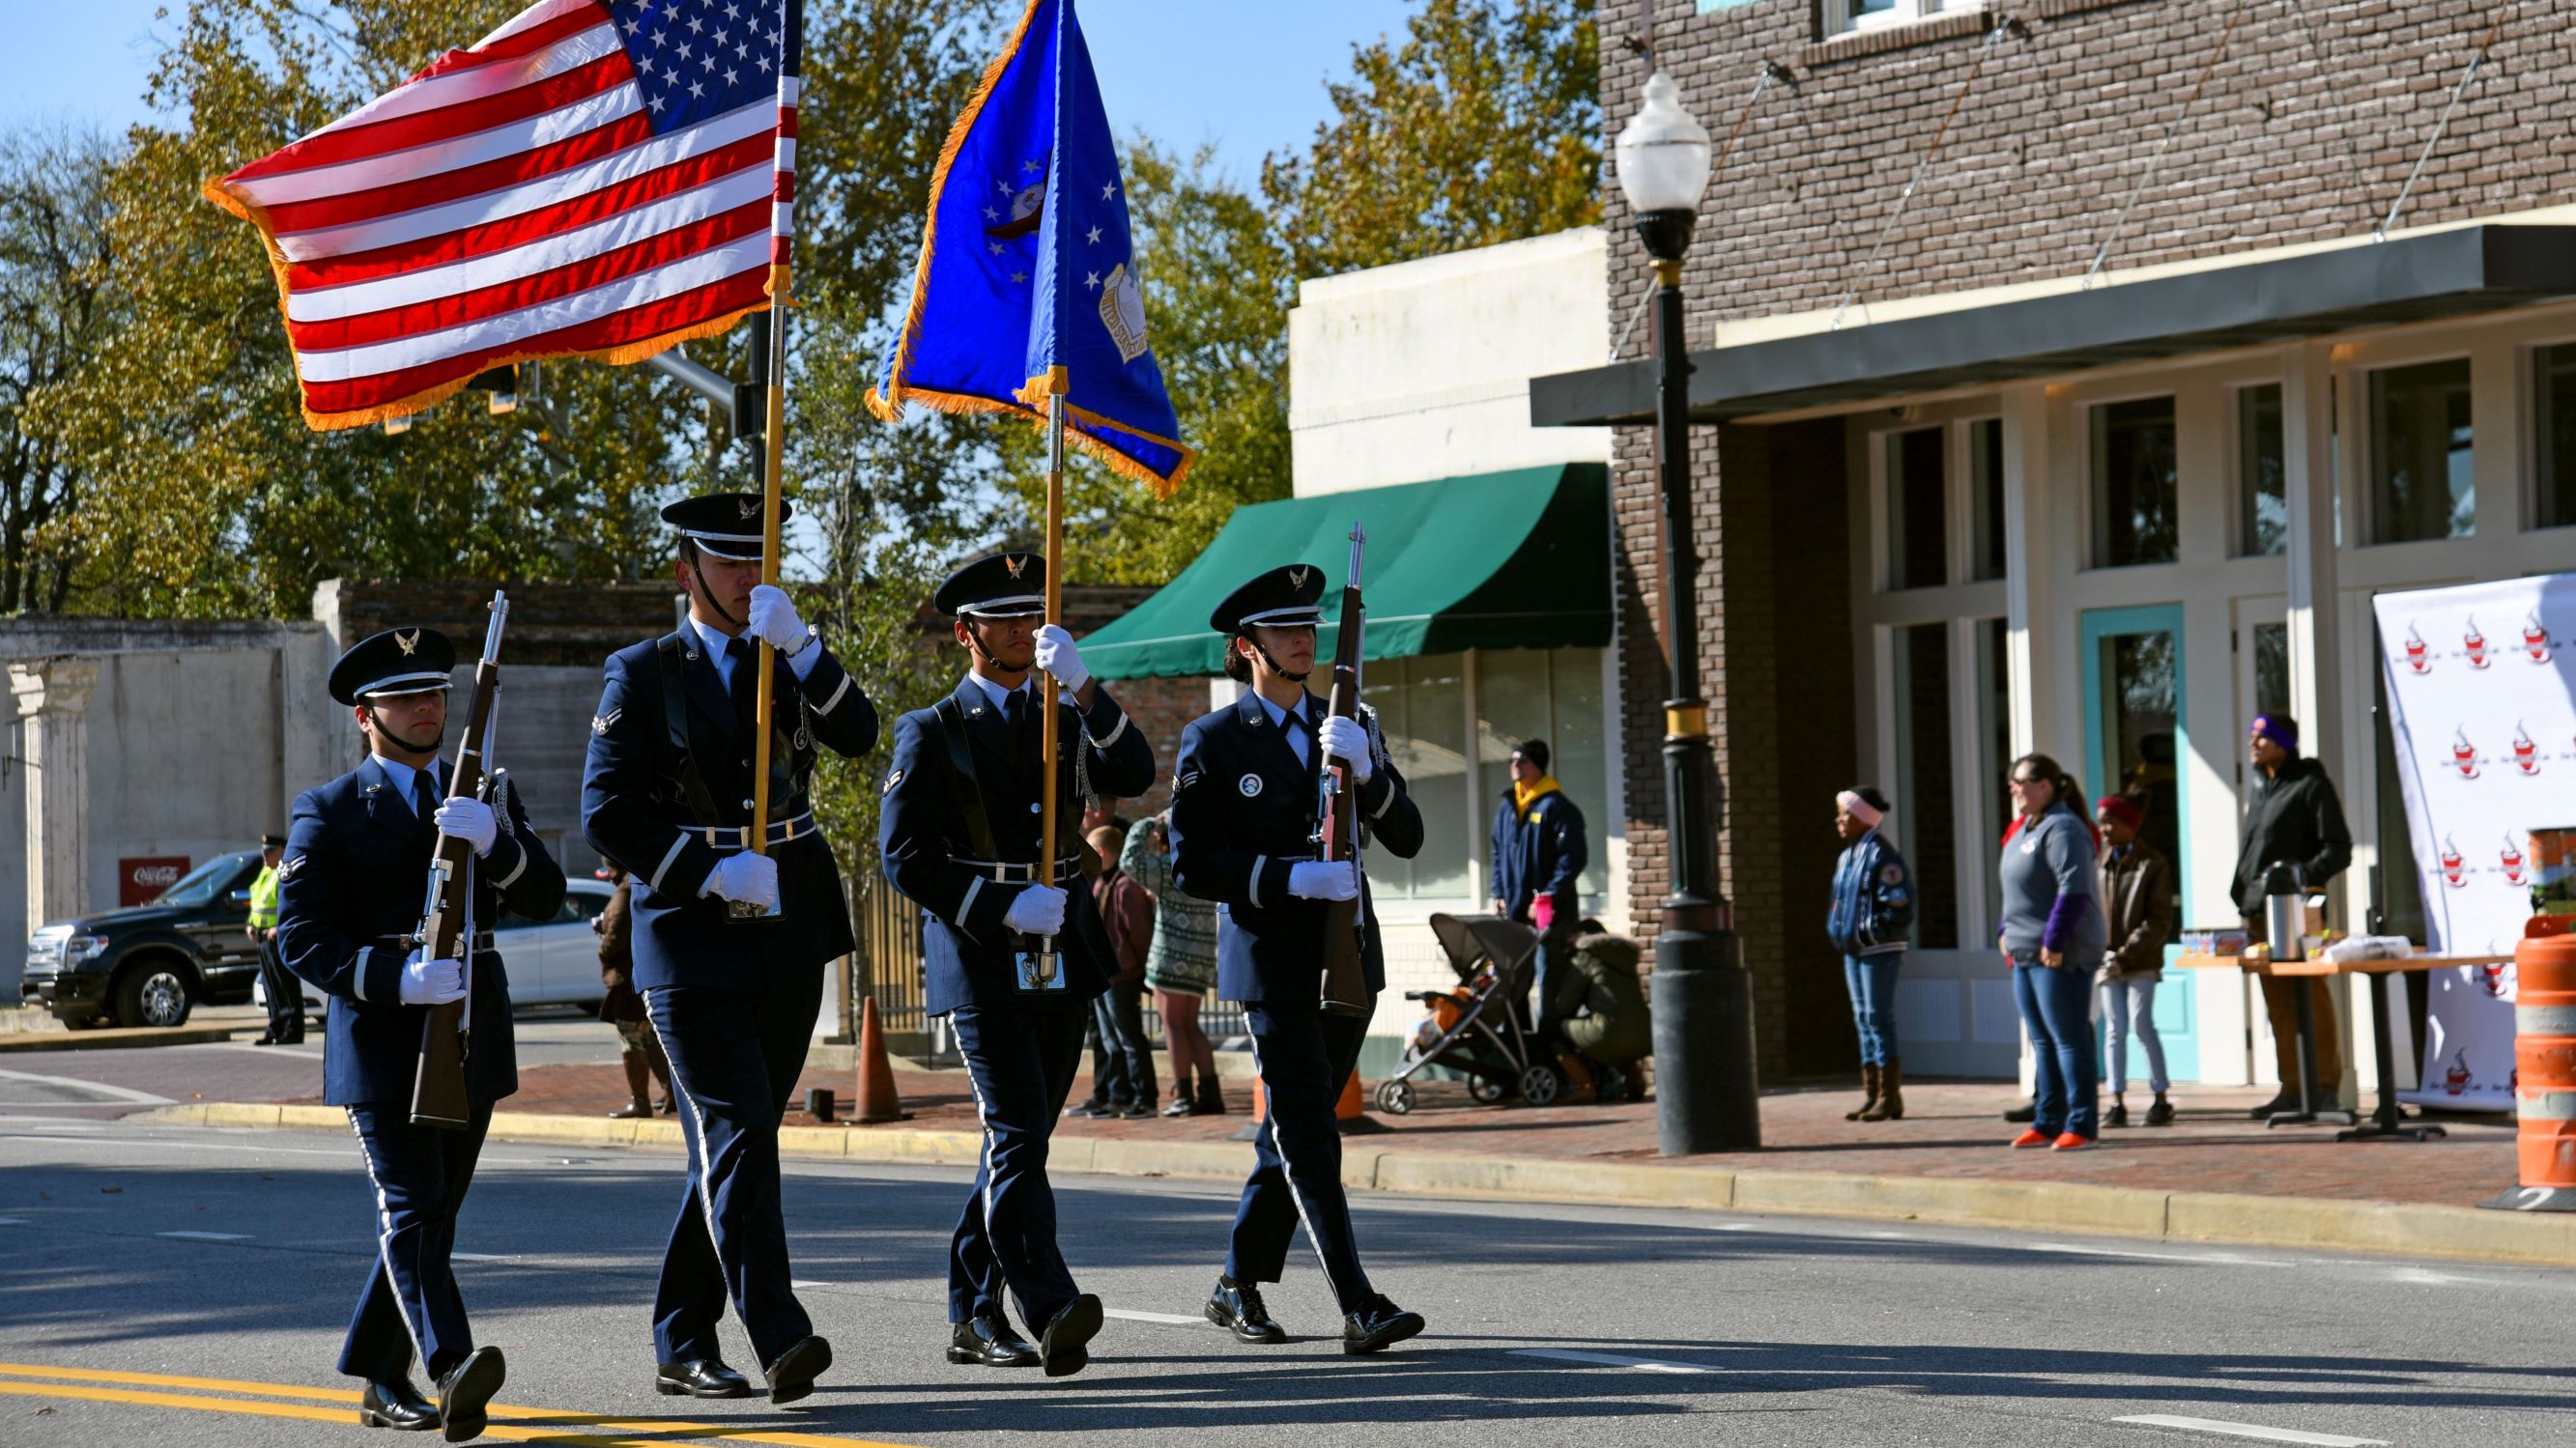 20th Fighter Wing honor guardsmen march holding the U.S. and Air Force flags in downtown Sumter